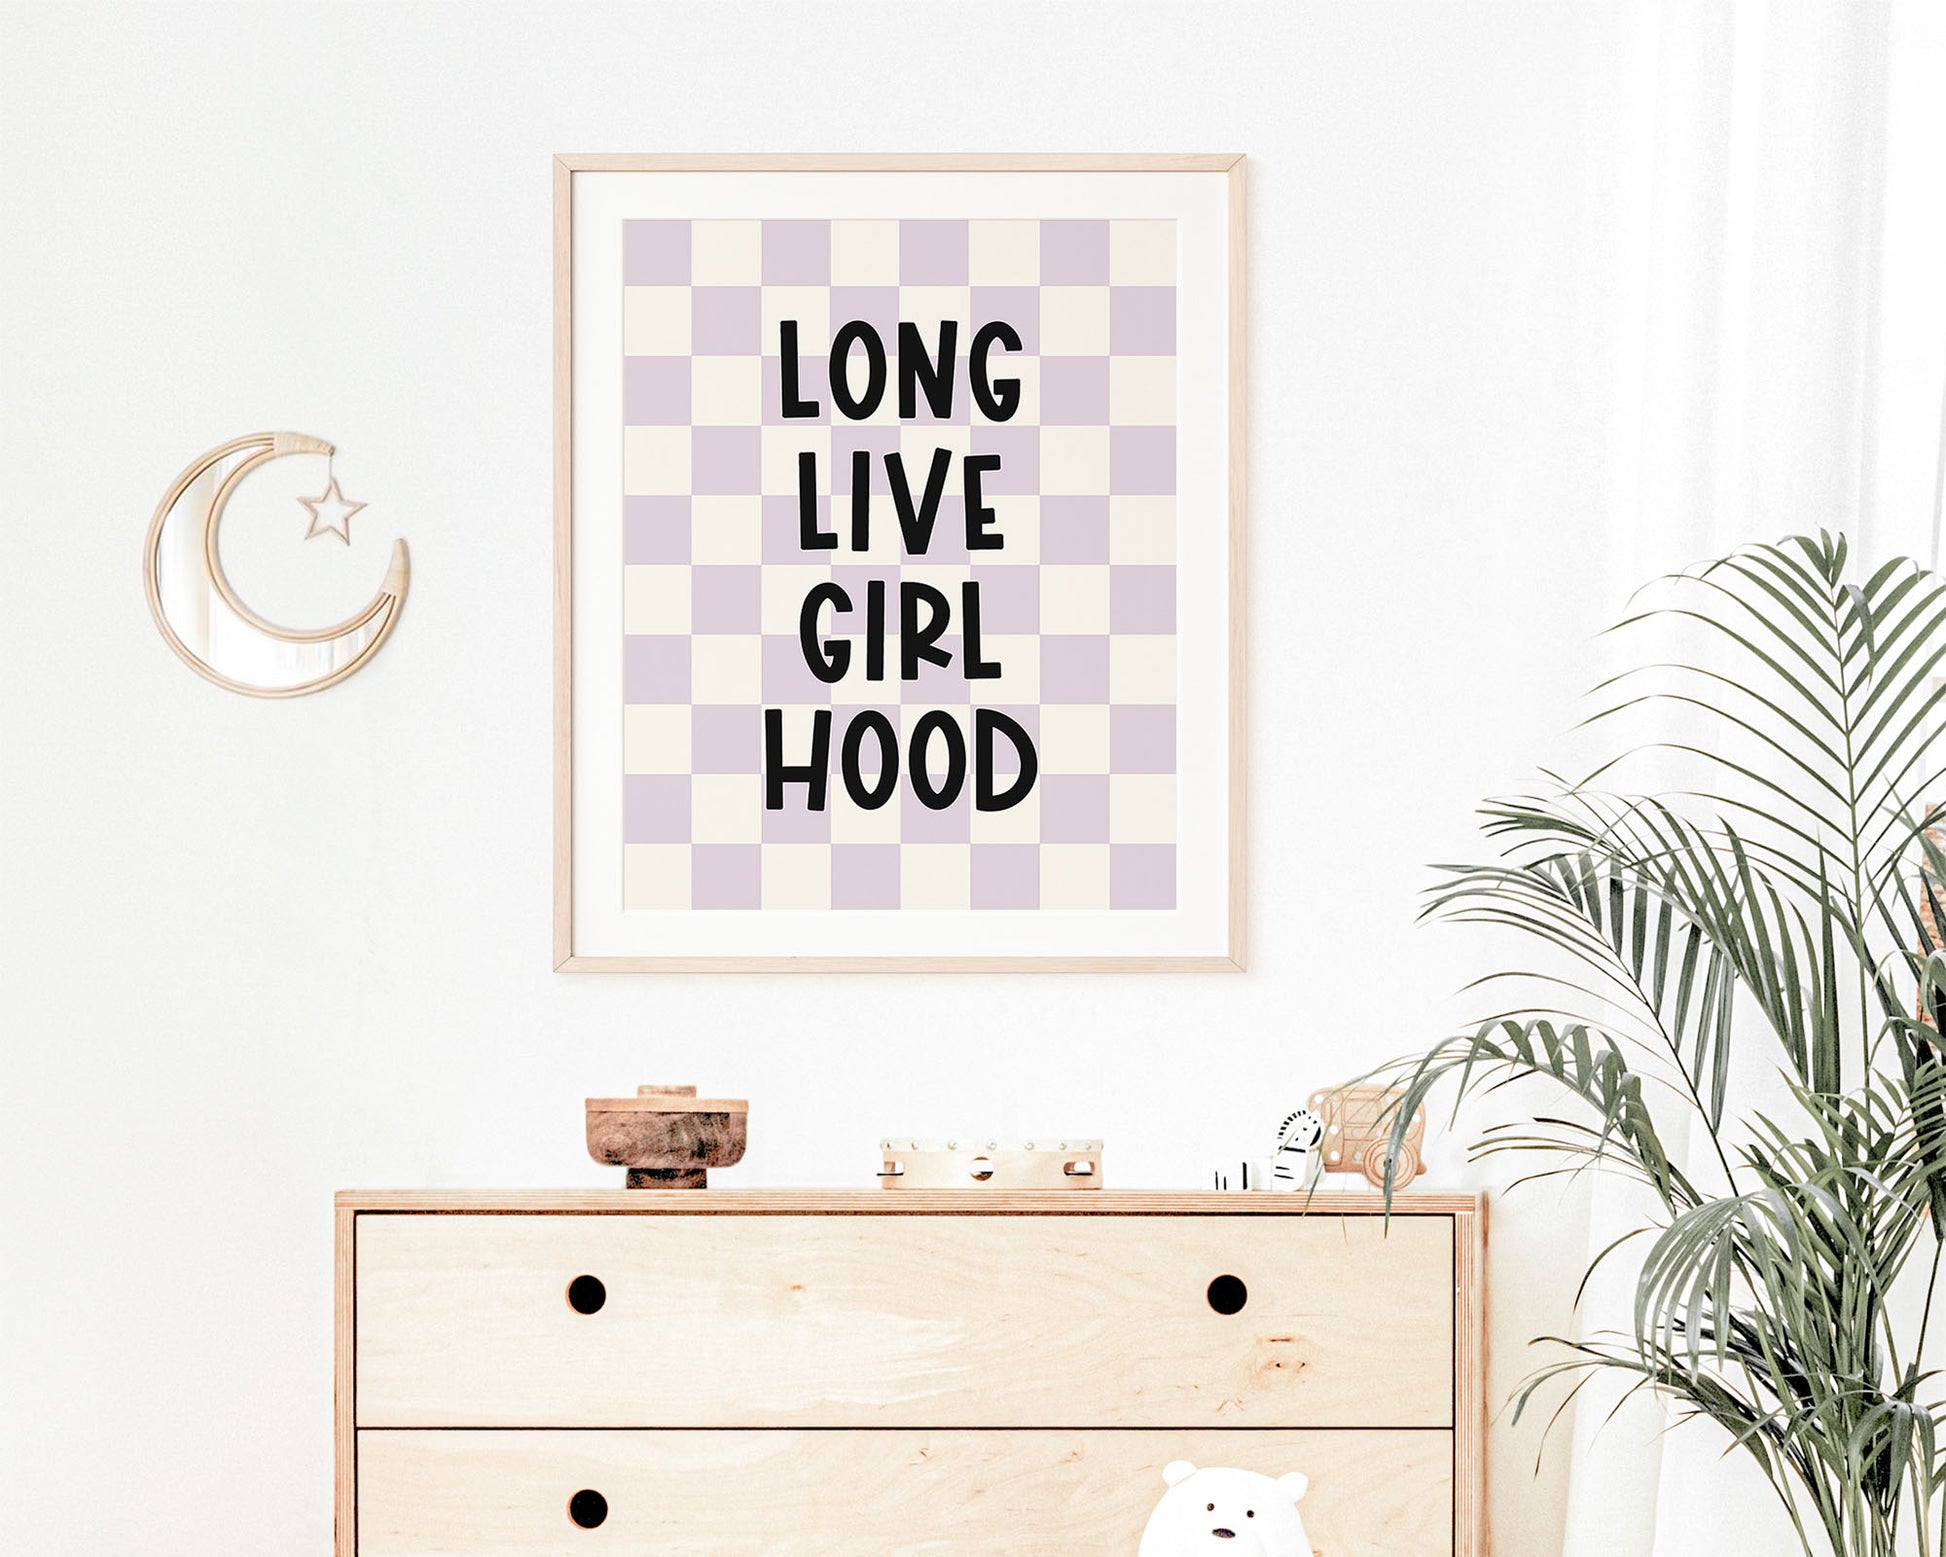 Long Live Girl Hood Instant Download Digital File featuring fun kids lettering in black on a lilac / soft pastel purple and off white checkered background. Perfect for Baby Girls Nursery Decor, Toddler Girls Bedroom Decor or Little Girls Playroom Wall Art.